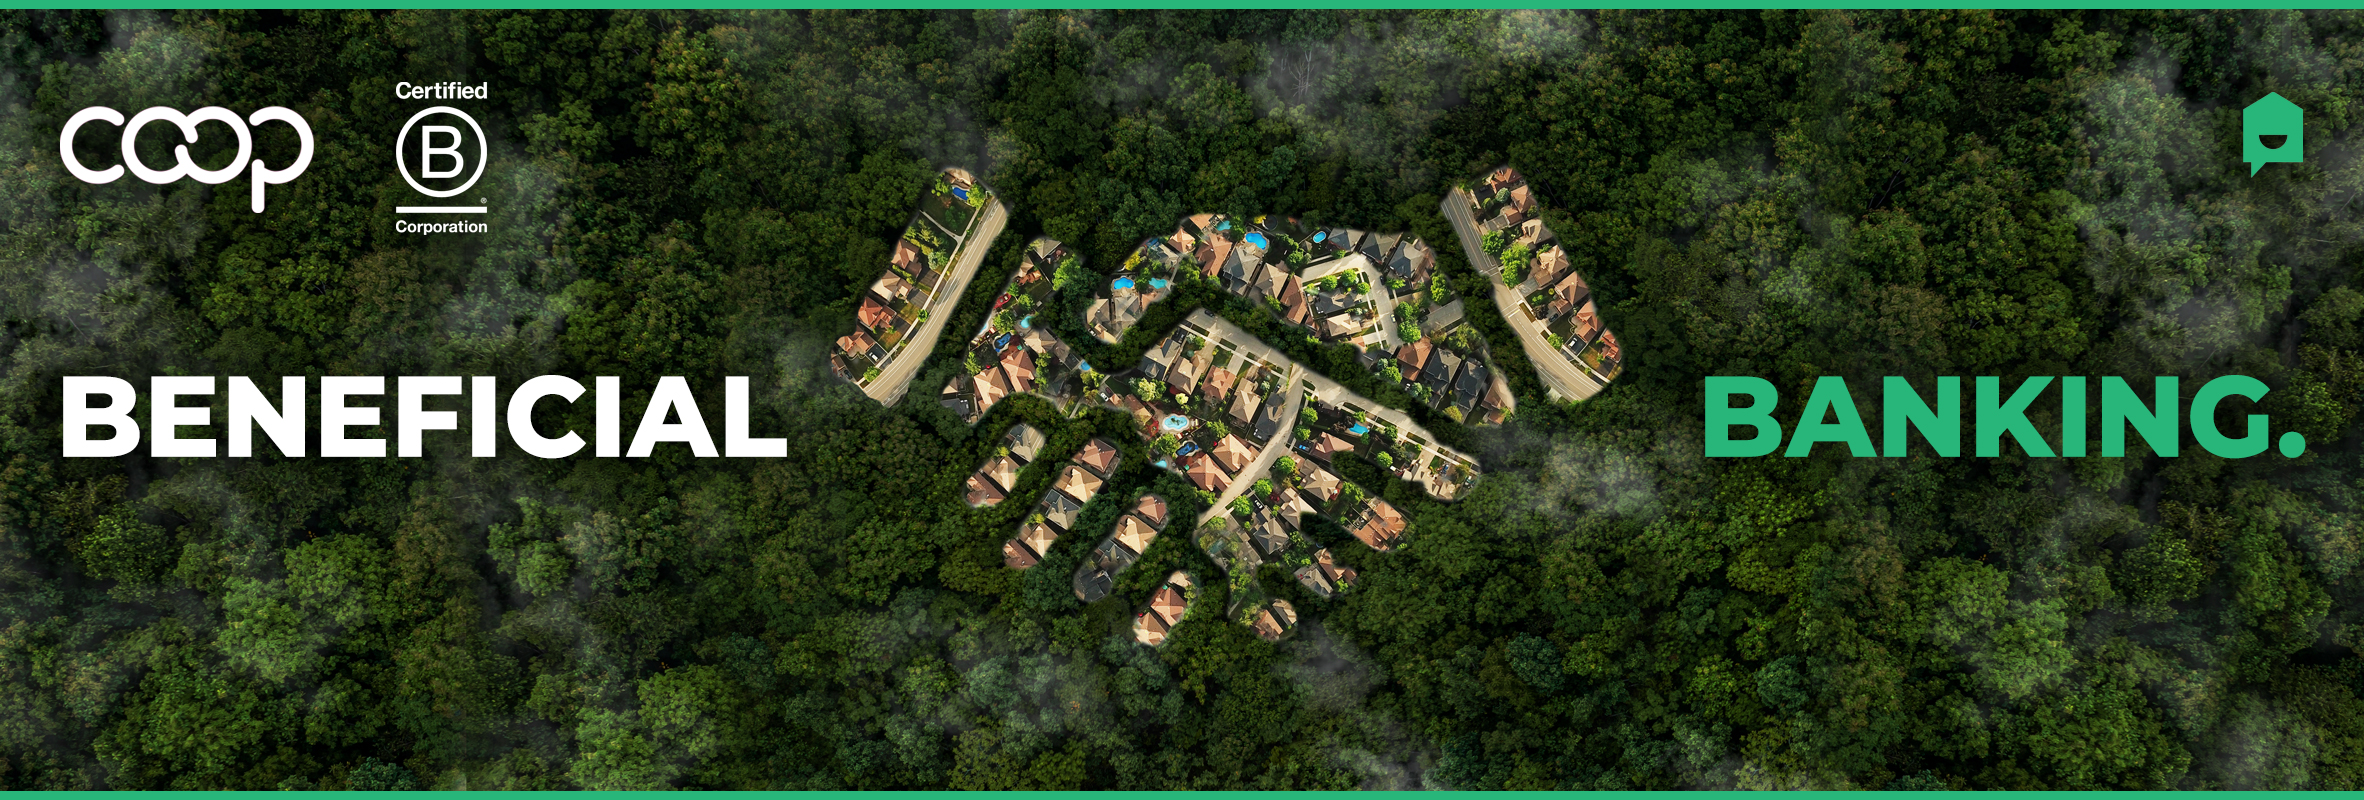 An image of a neighbourhood, depicted as an outline of two hands shaking, set against an aerial view of a lush forest. The text reads 'Beneficial Banking,'